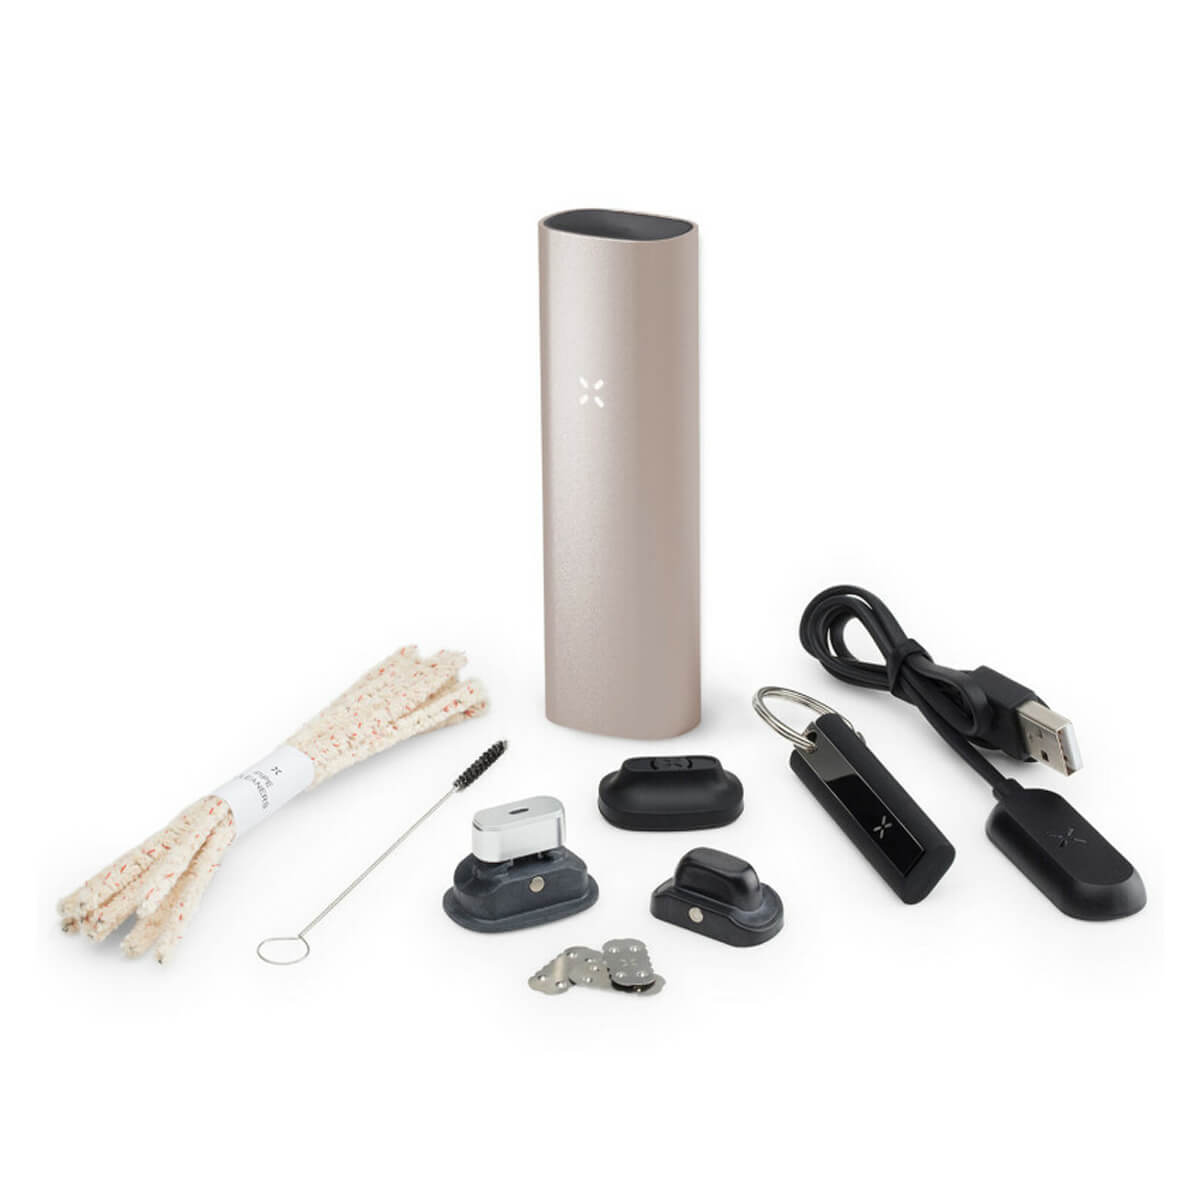 10 Must-Have Pax 3 Accessories in 2022